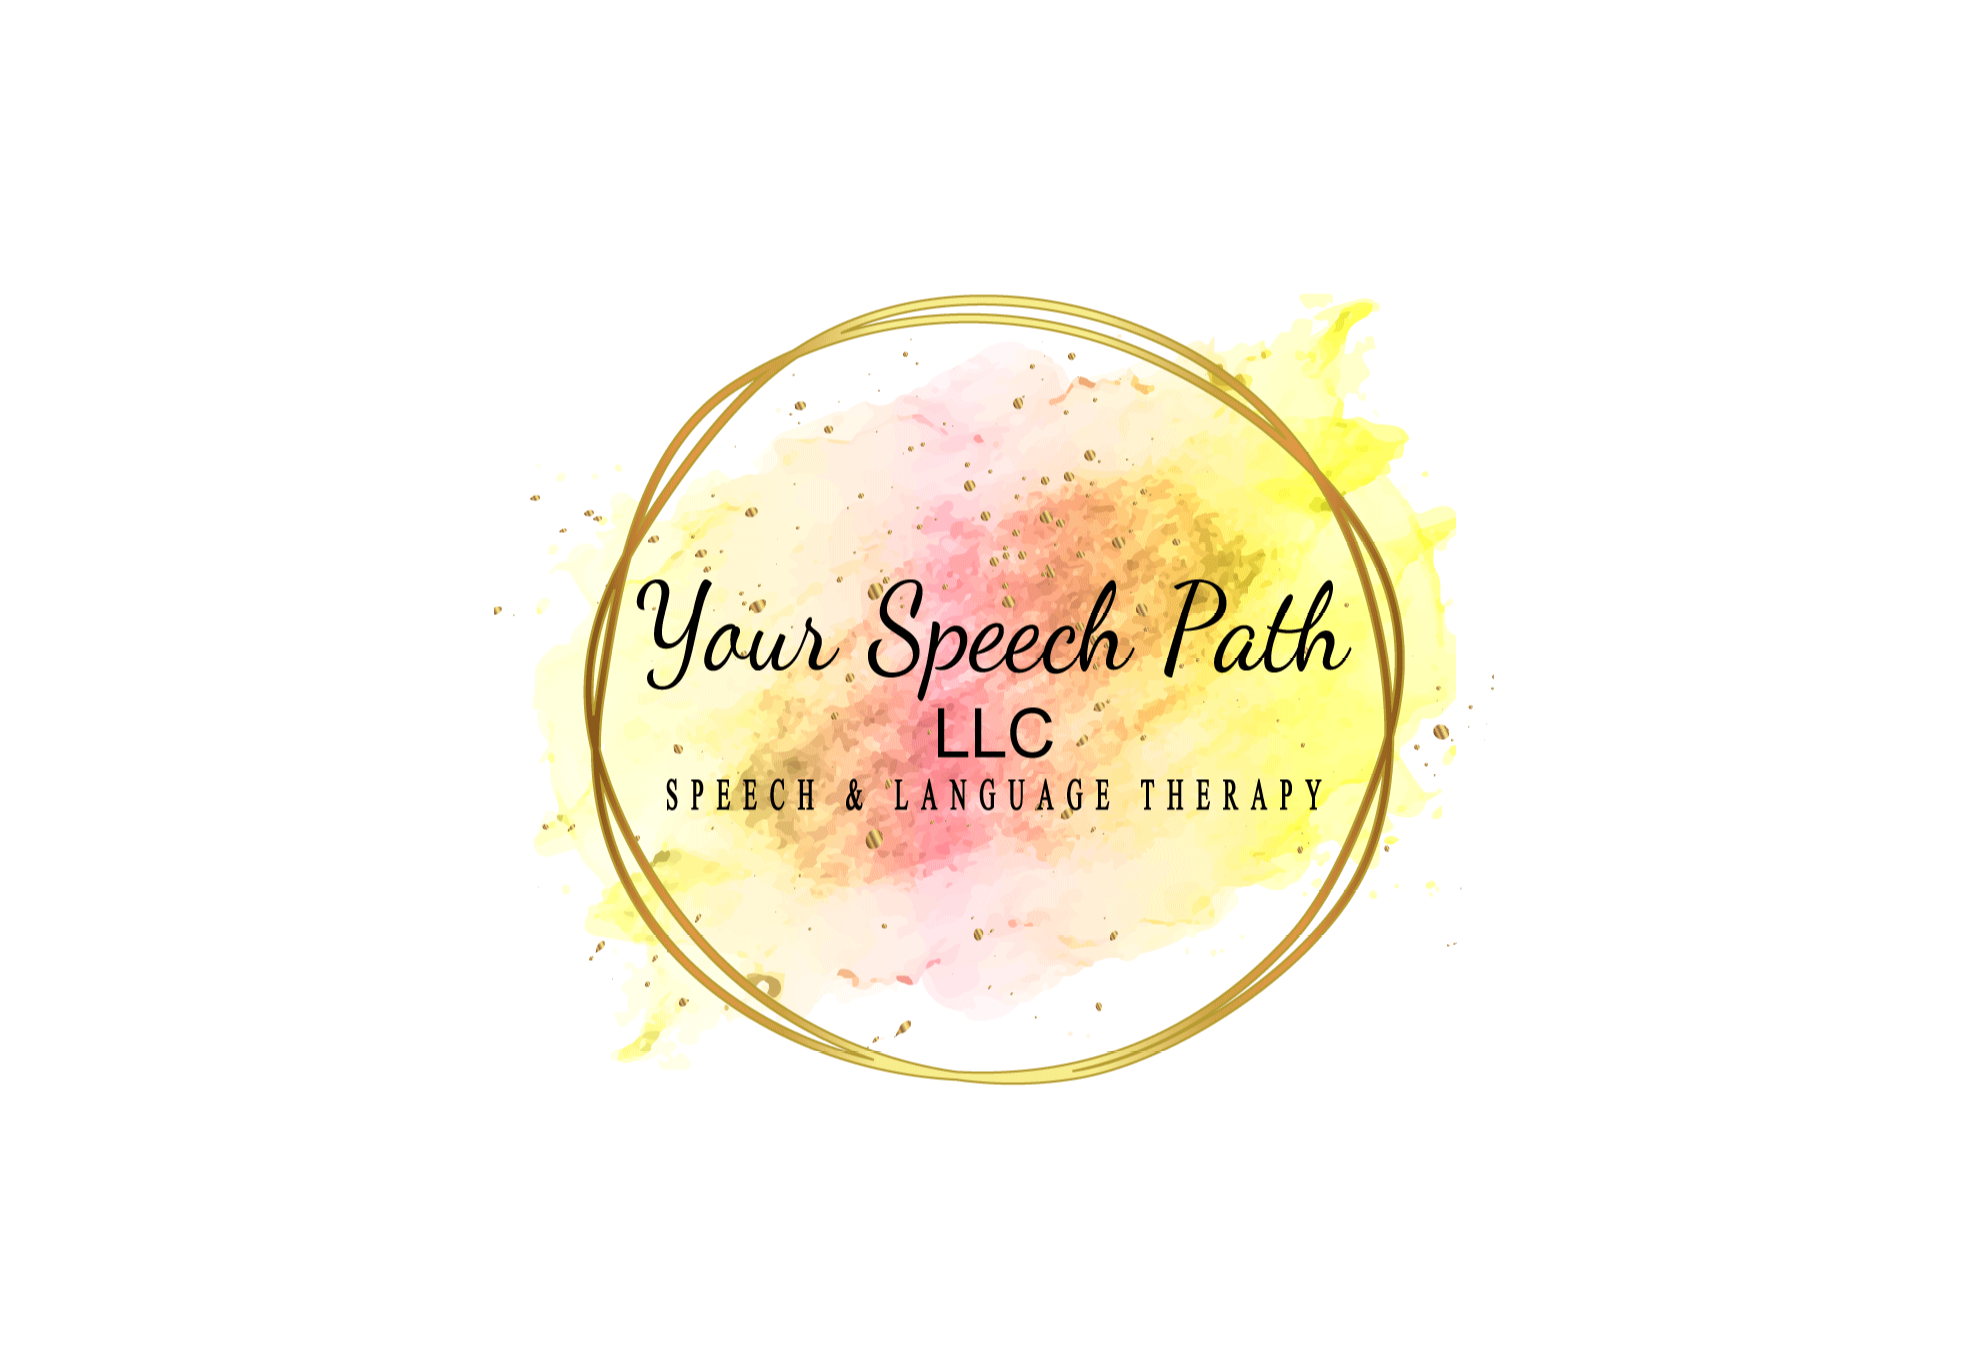 The Path to Your Child's Voice Starts Today - Your Speech Path